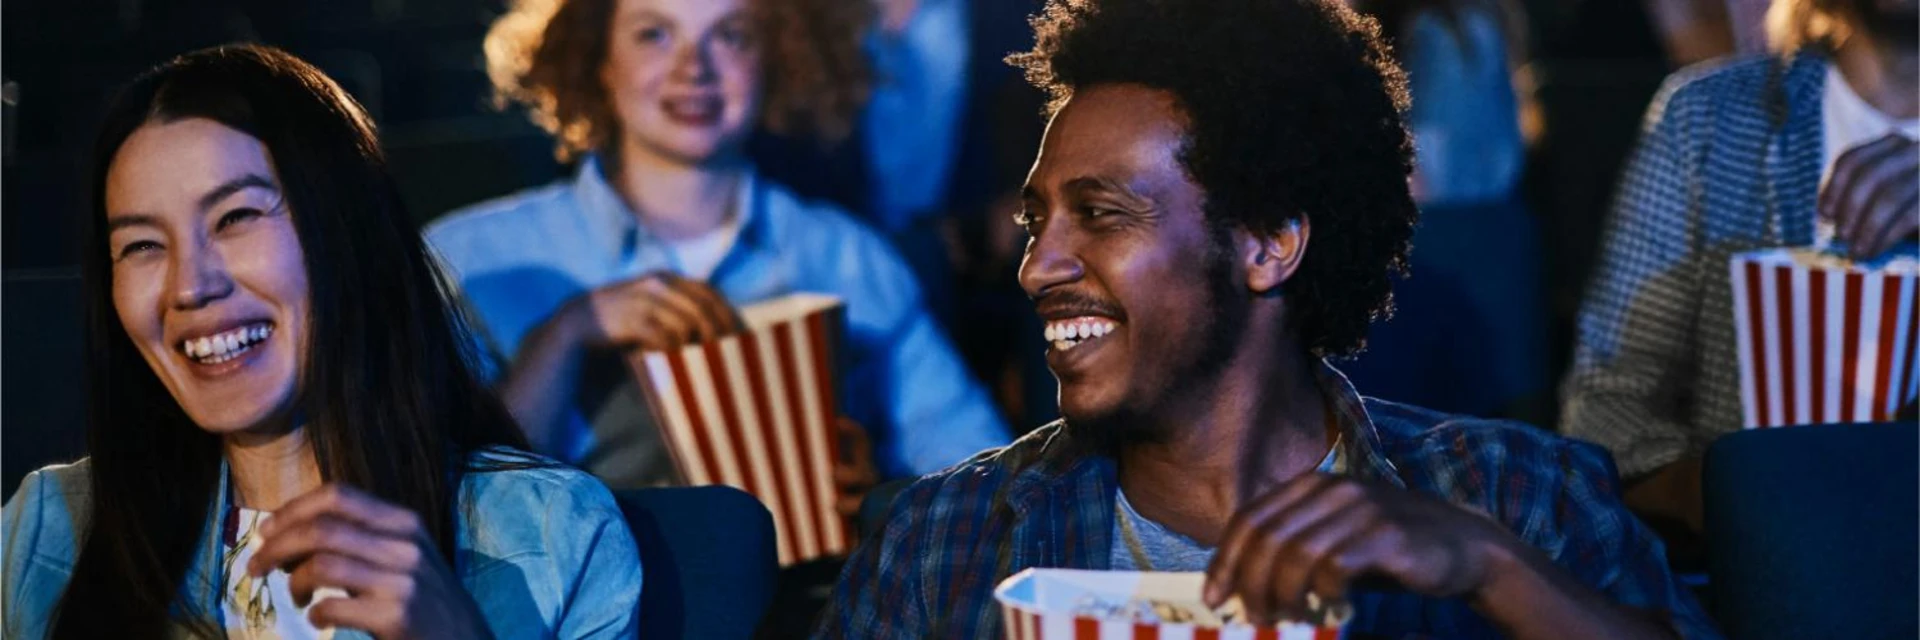 HOW TO GET CHEAP MOVIE TICKETS [SO YOU CAN SPLURGE ON SNACKS]